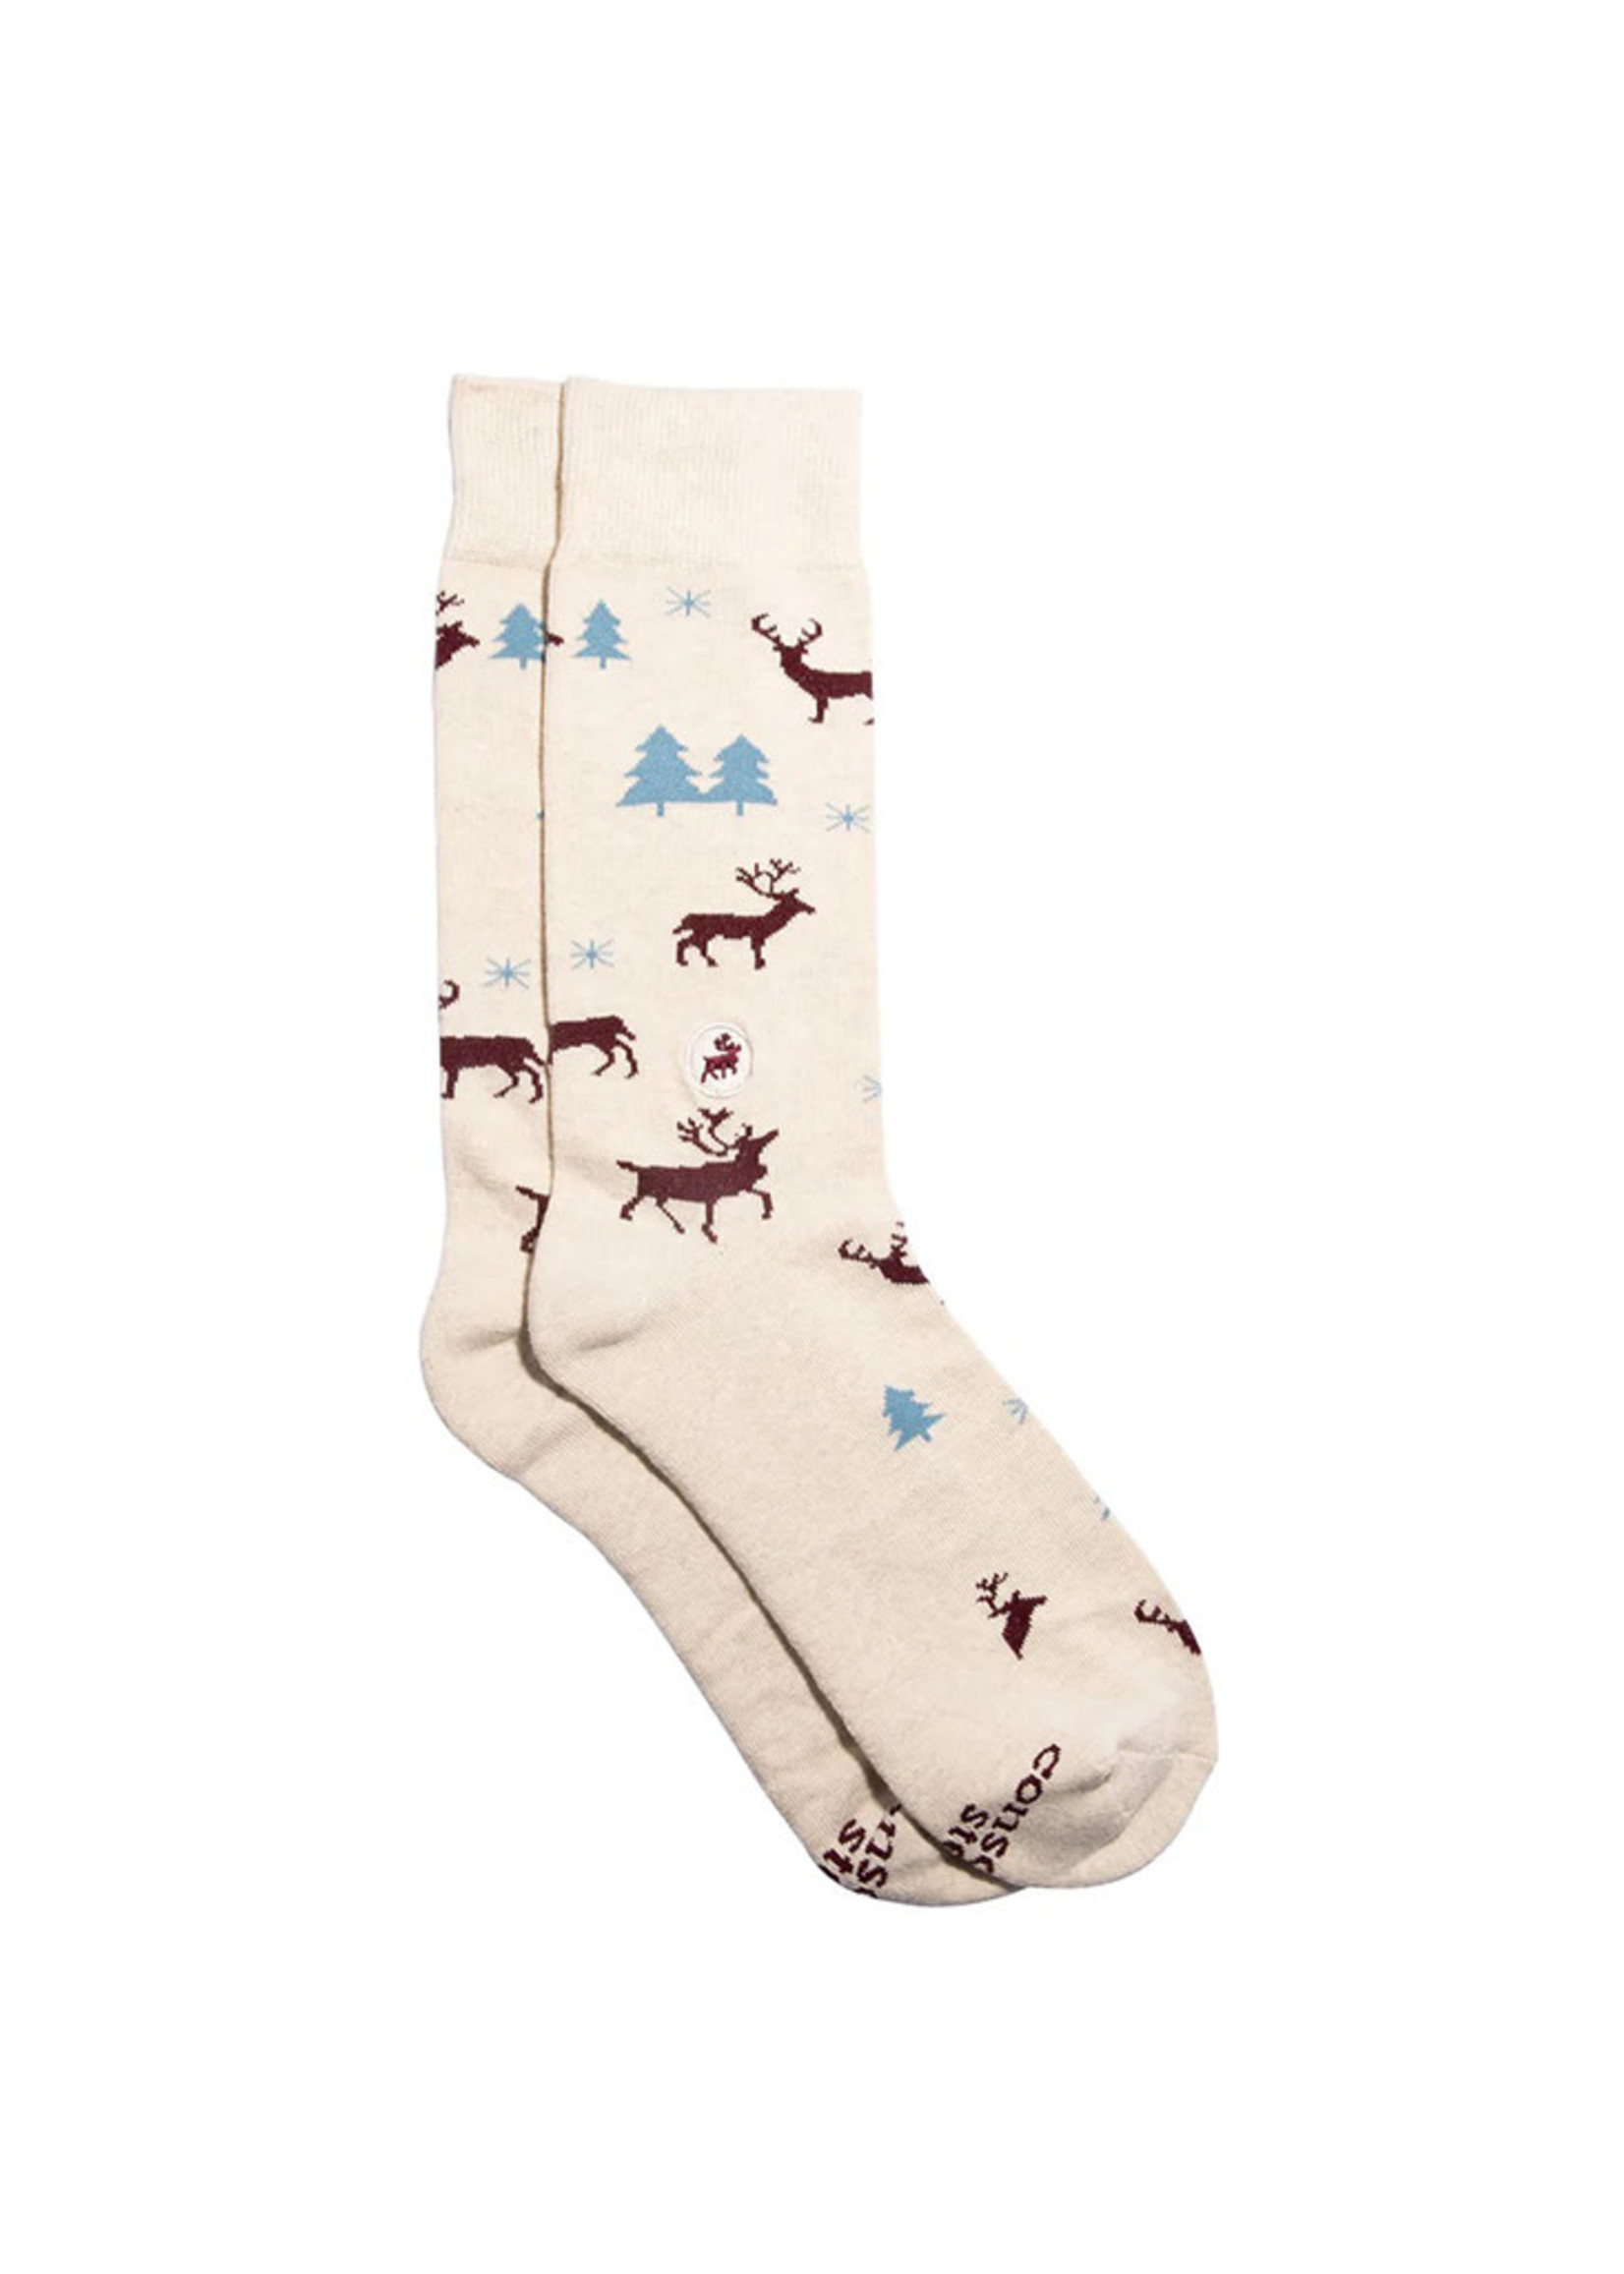 Conscious Step Women's Socks that Protect Caribou